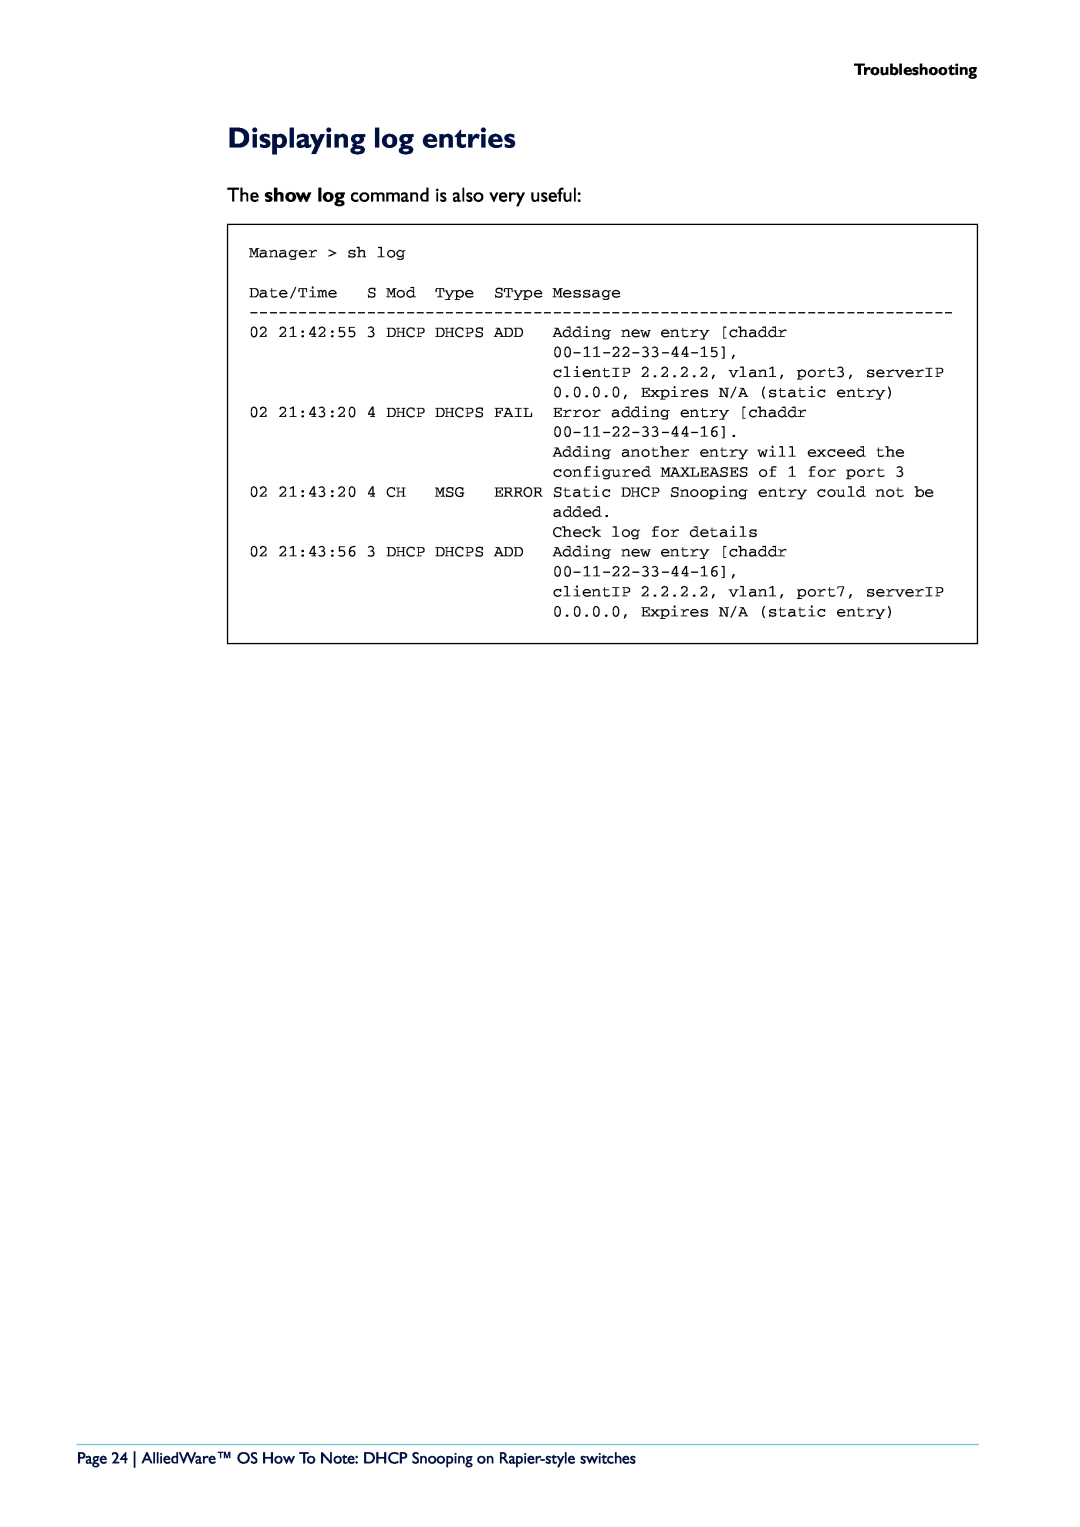 Allied Telesis Rapier i Series manual Displaying log entries, The show log command is also very useful, Troubleshooting 